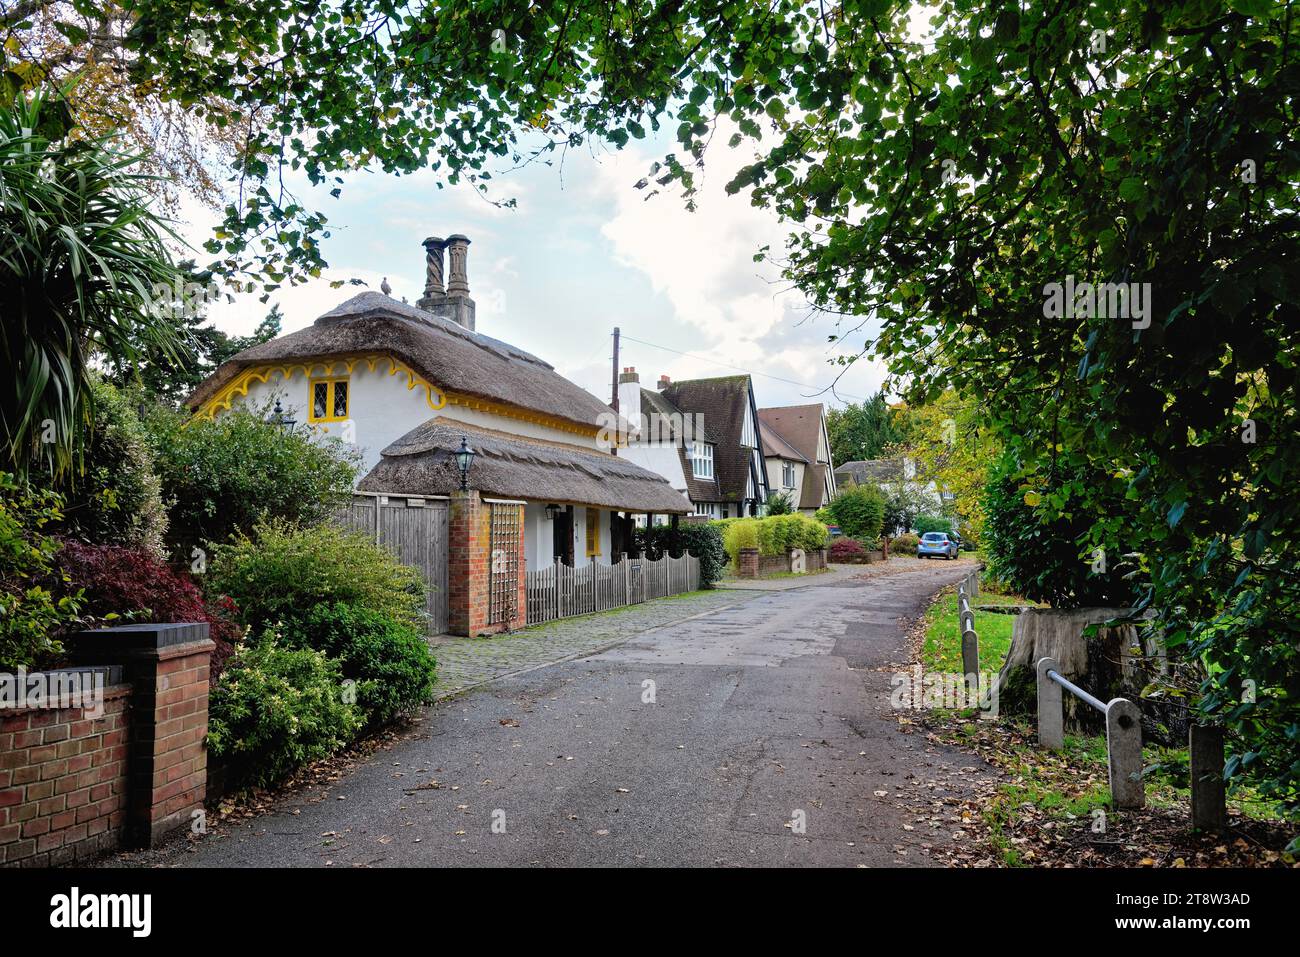 The Thatched Cottage on Abbey Drive in a secluded area of Laleham Surrey England UK Stock Photo